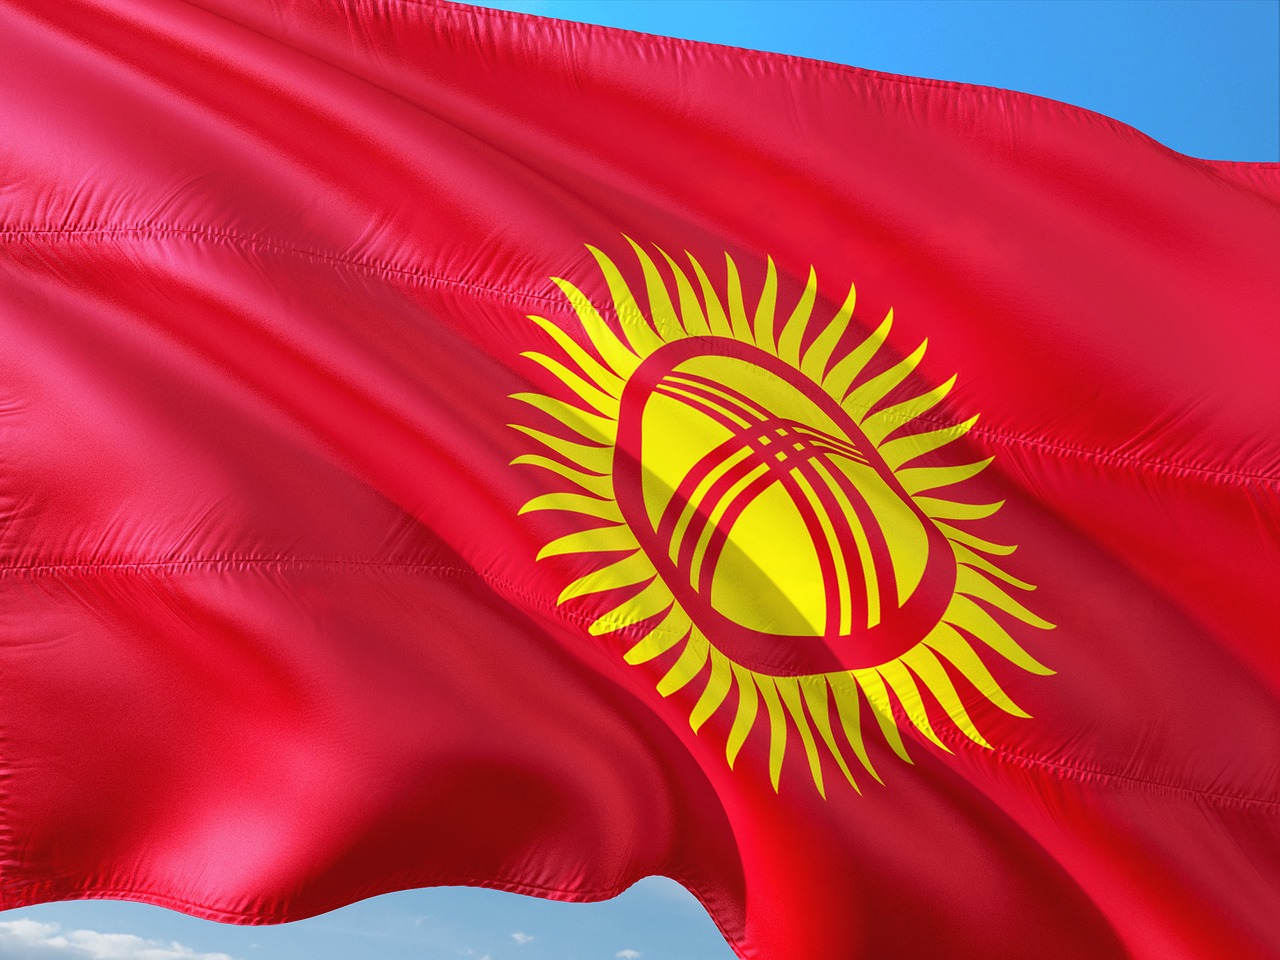 Kyrgyzstan parliamentary election results annulled